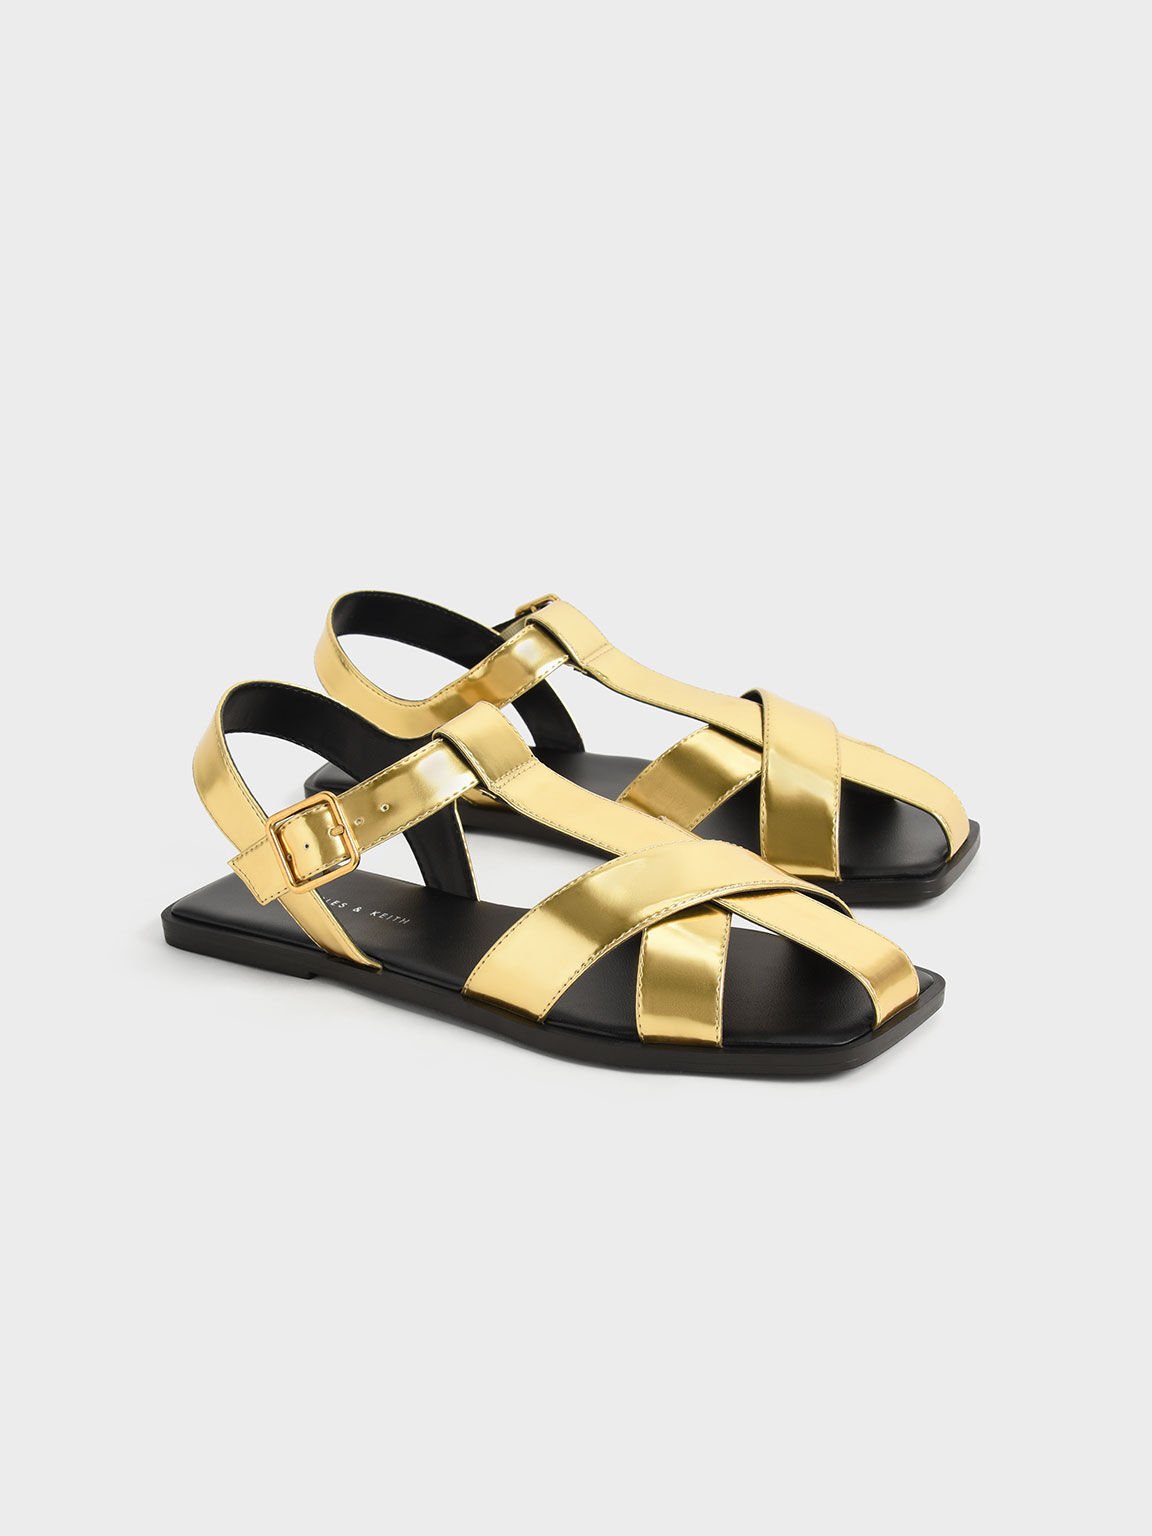 Metallic Strappy Crossover Sandals, Gold, hi-res